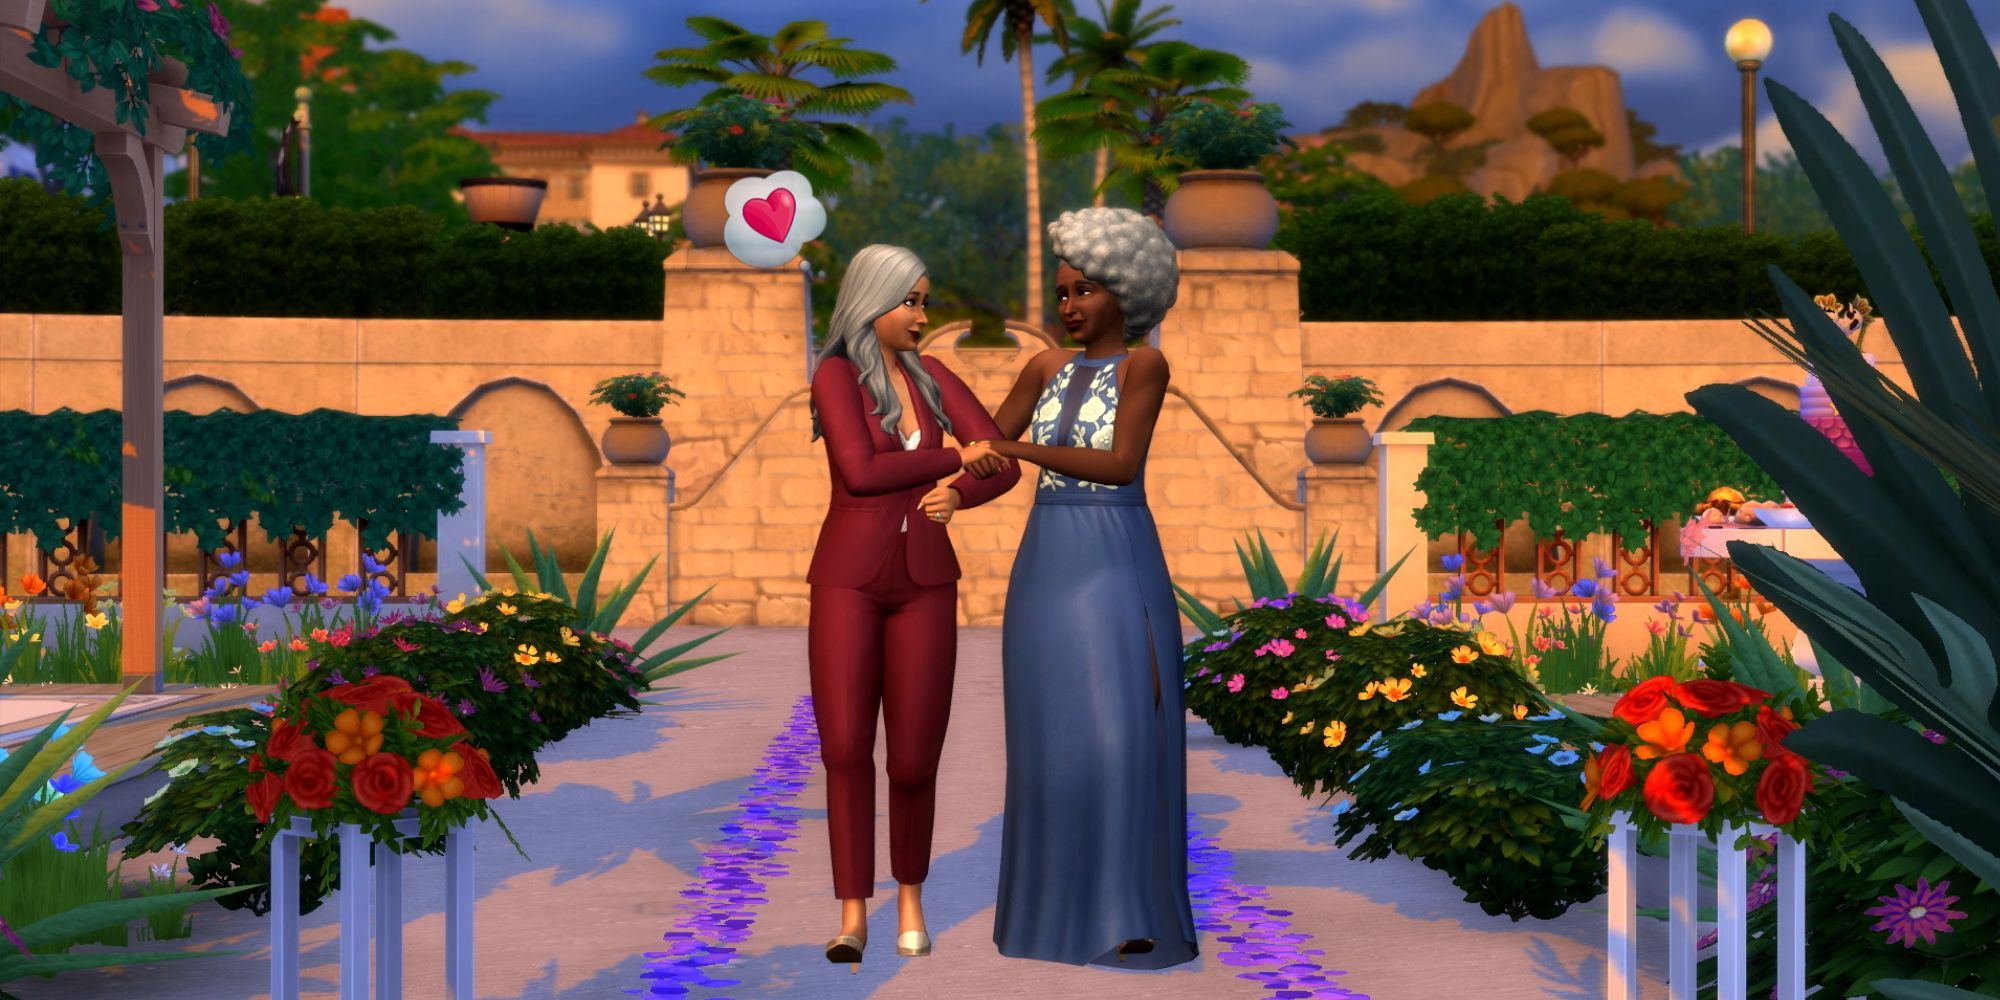 Sims 4 wedding dom cam old vow renewal